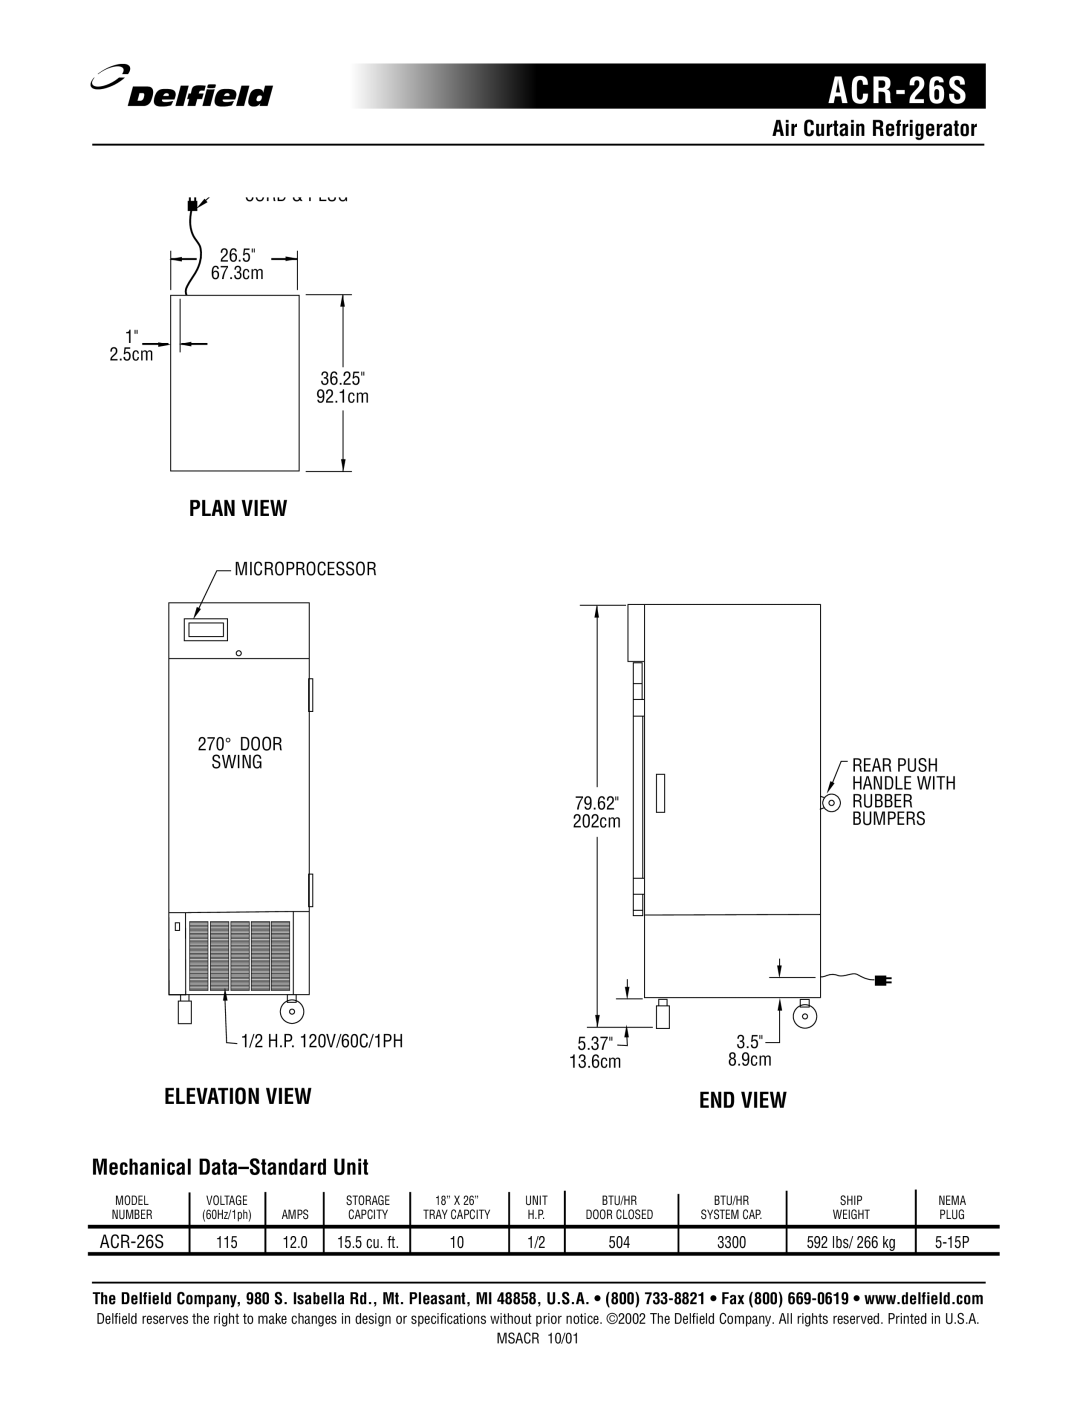 Delfield ACR-26S specifications Plan View, End View, Air Curtain Refrigerator, Mechanical Data-StandardUnit, Elevation View 